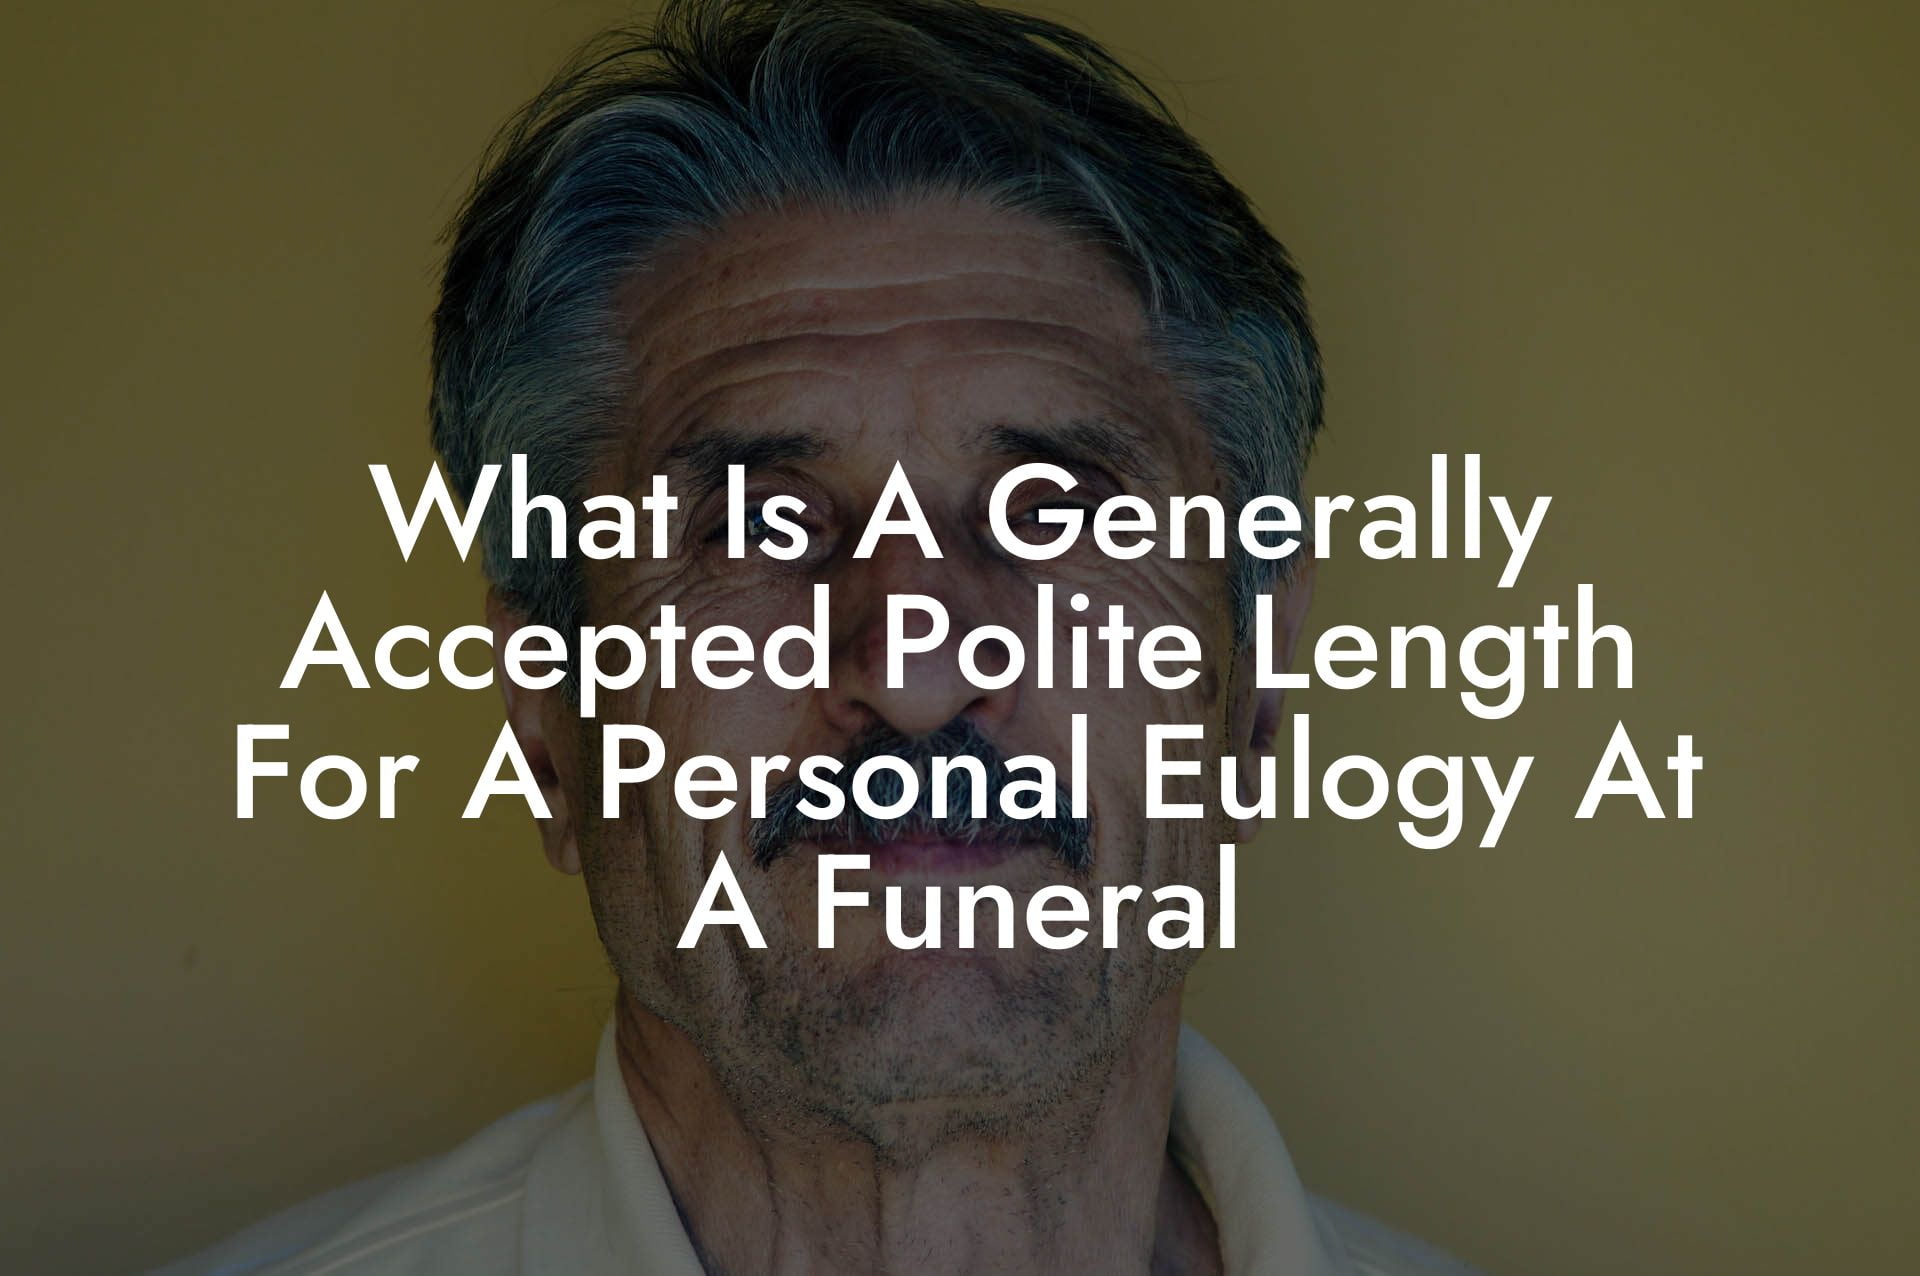 What Is A Generally Accepted Polite Length For A Personal Eulogy At A Funeral